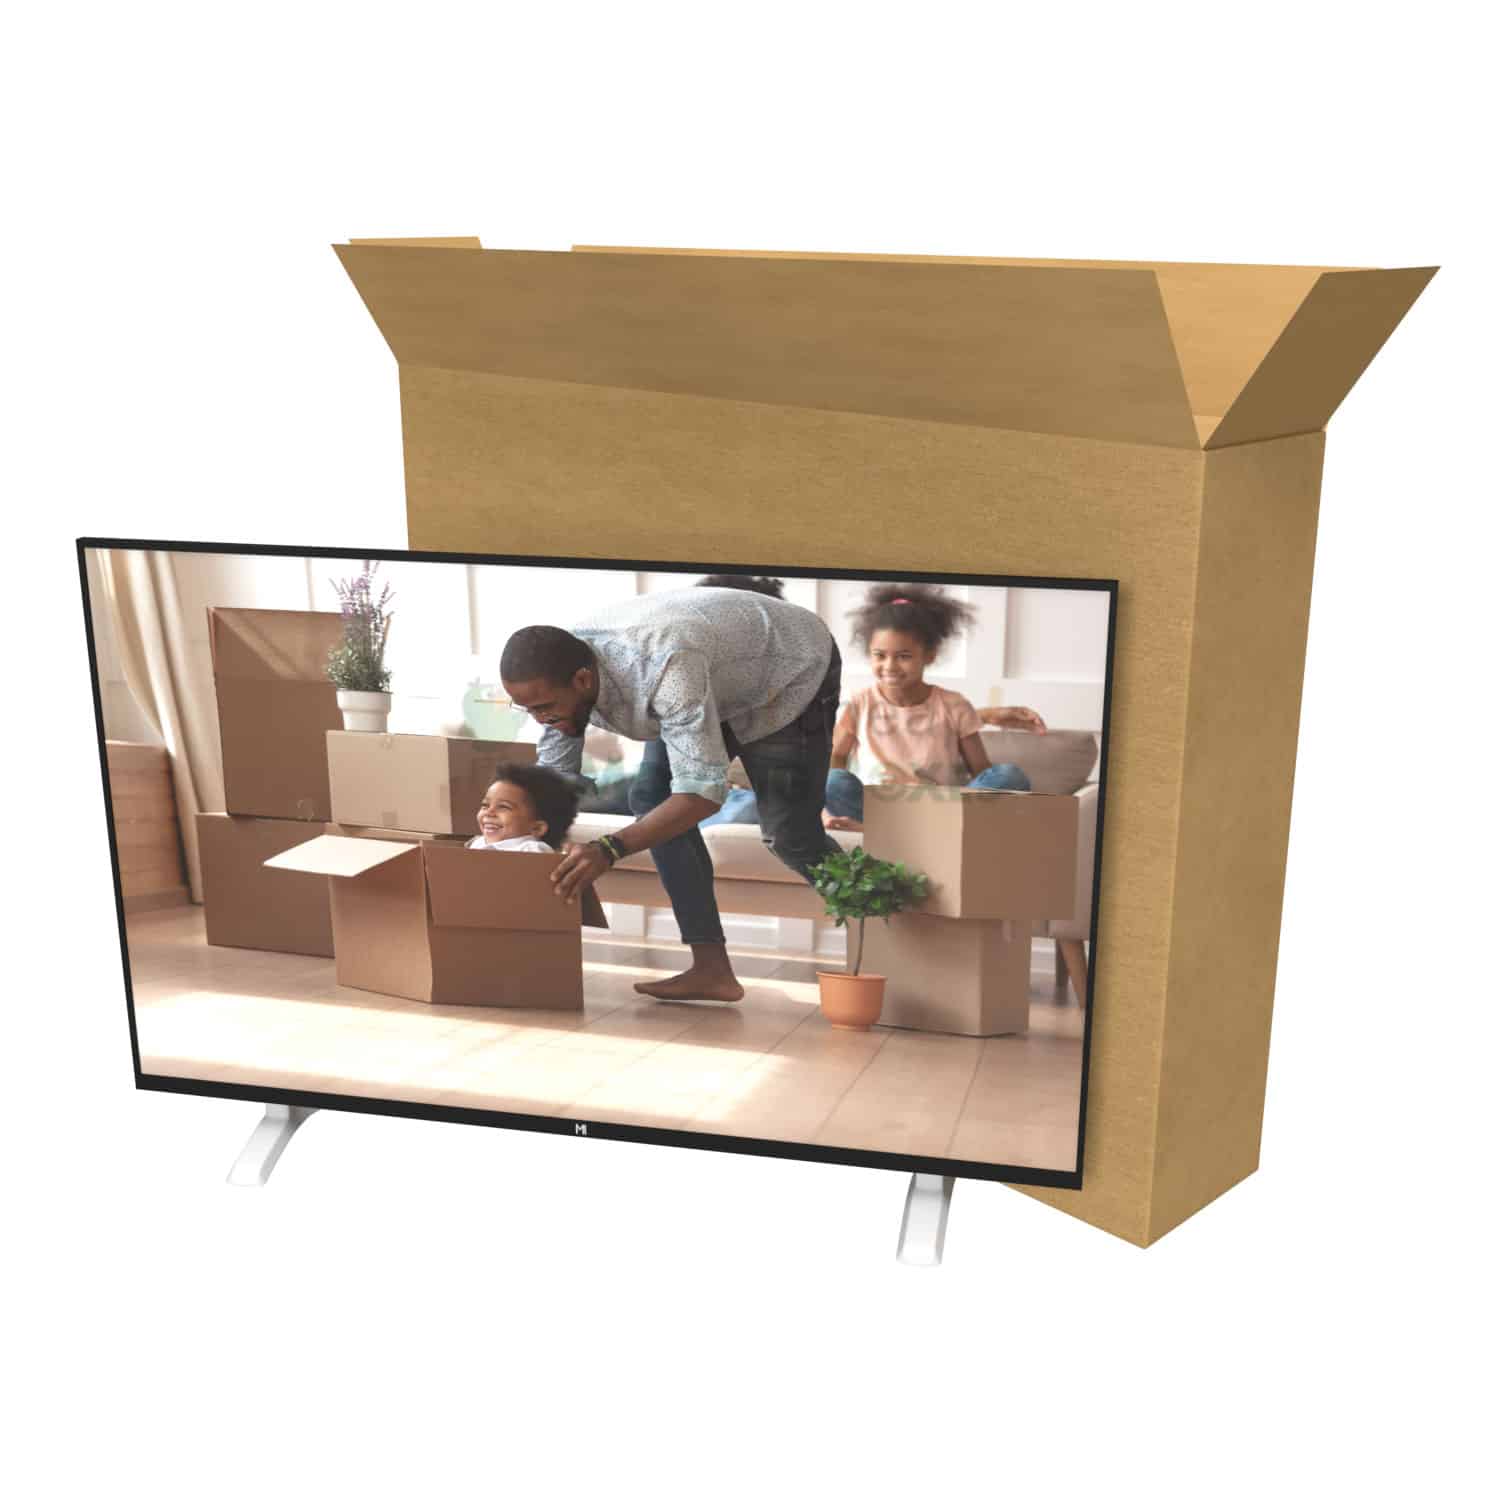 TV Boxes Picture Box Artwork Boxes Double Wall Strong Boxes for removal moving house. National delivery next day. Bubble wrap protect tv screen. Delivery screen kit with box and foam. Peterborough tv boxes for Picture framework and mirrors